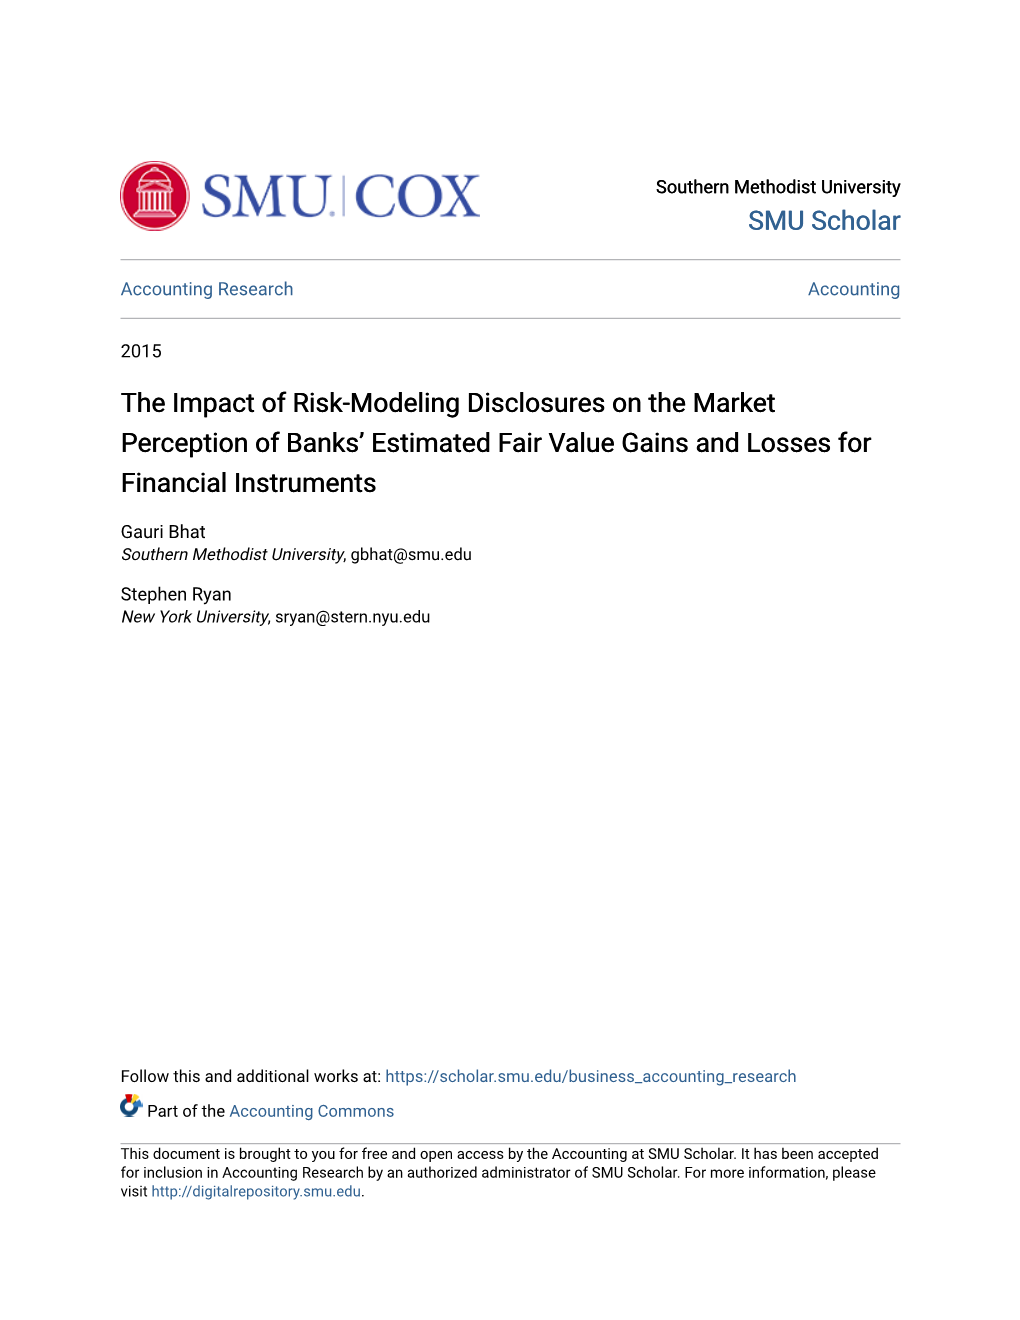 The Impact of Risk-Modeling Disclosures on the Market Perception of Banks' Estimated Fair Value Gains and Losses for Financial